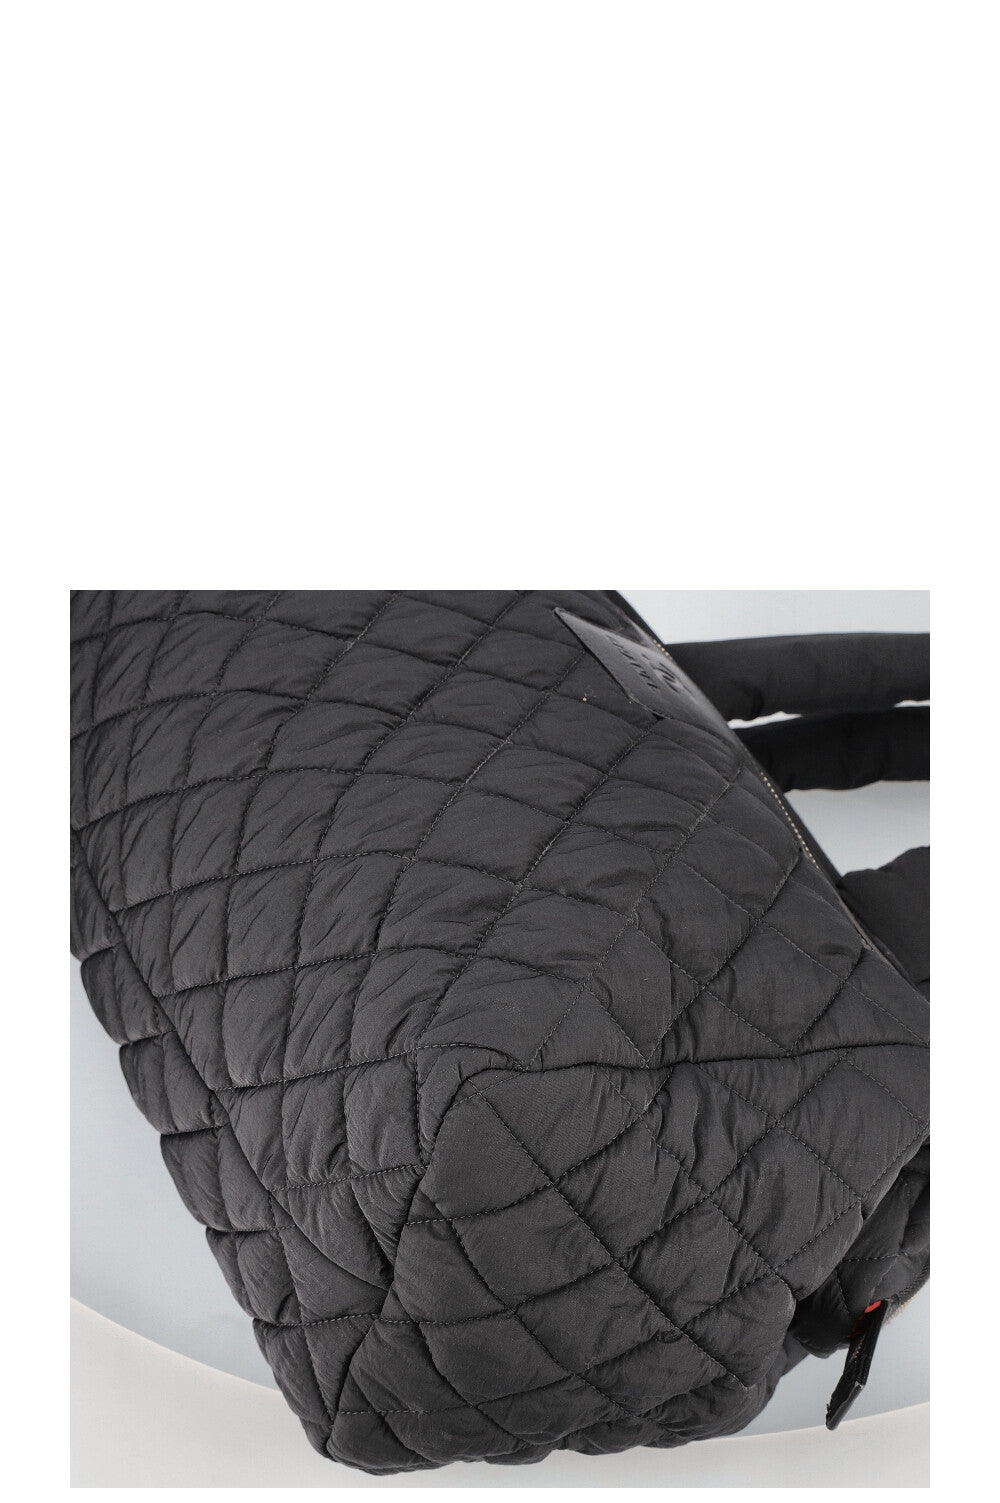 CHANEL Coco Cocoon Bowling Bag Quilted Nylon Black